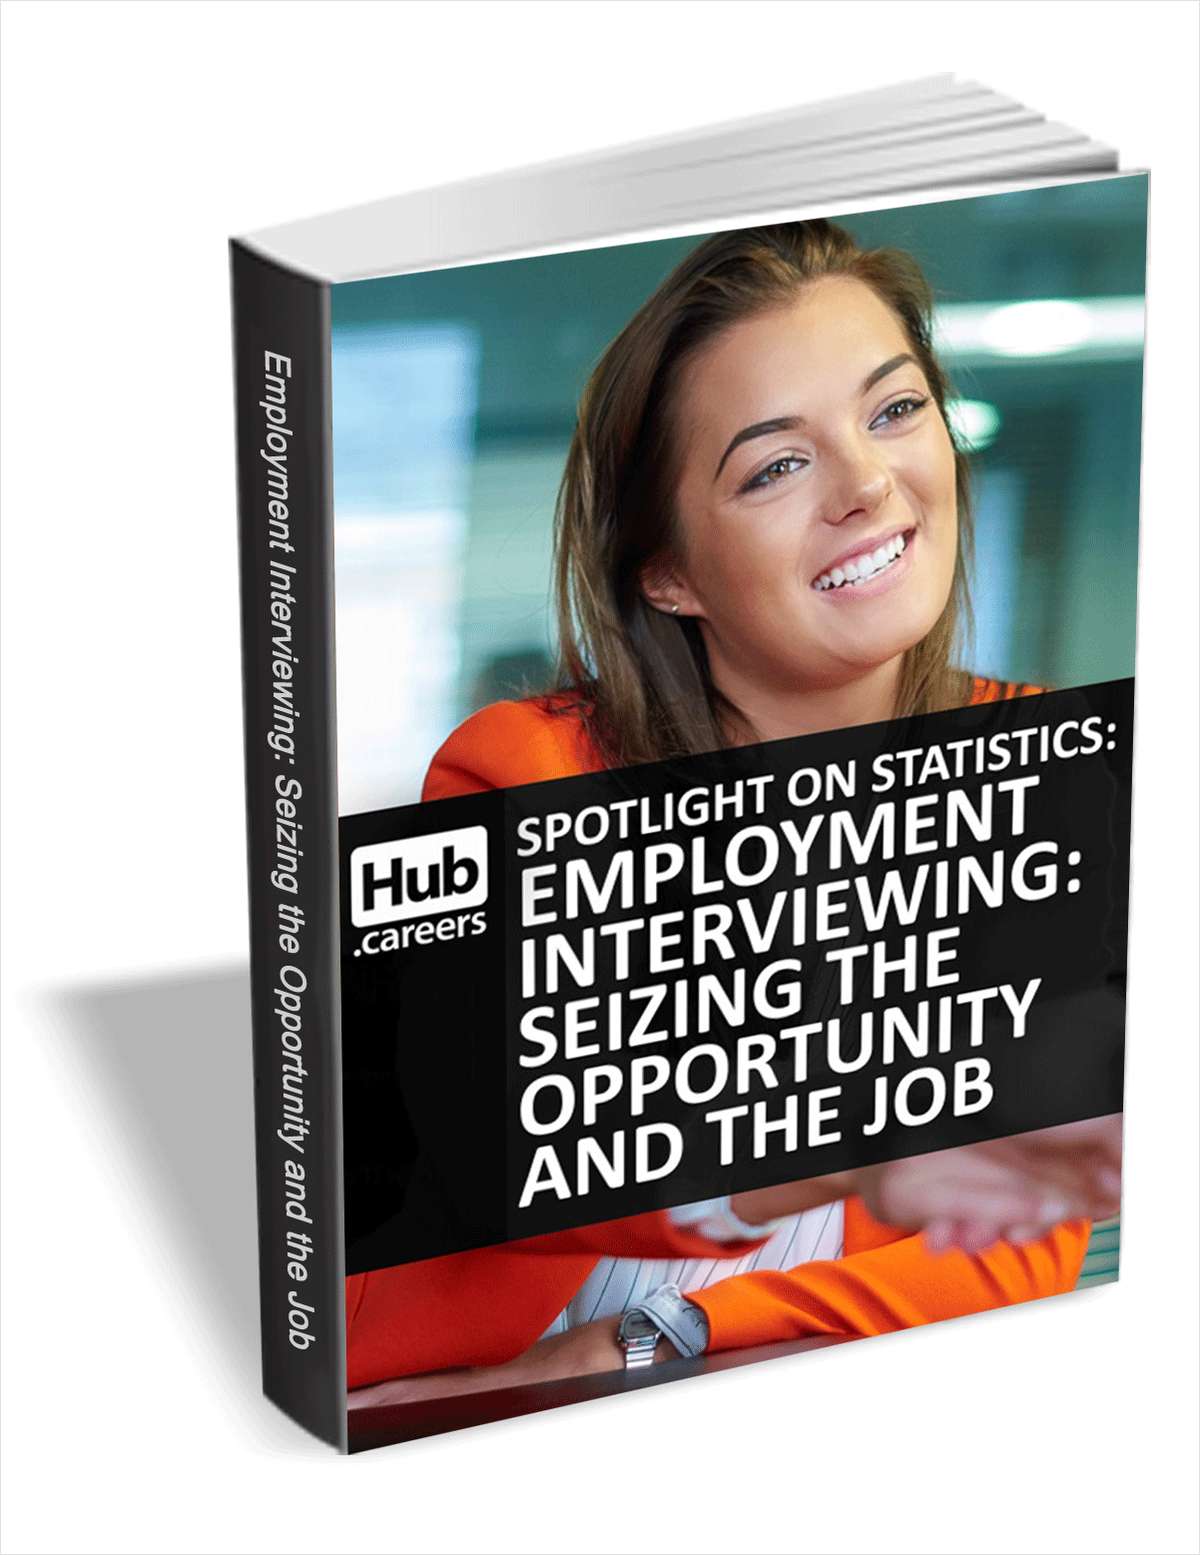 Employment Interviewing: Seizing the Opportunity and the Job